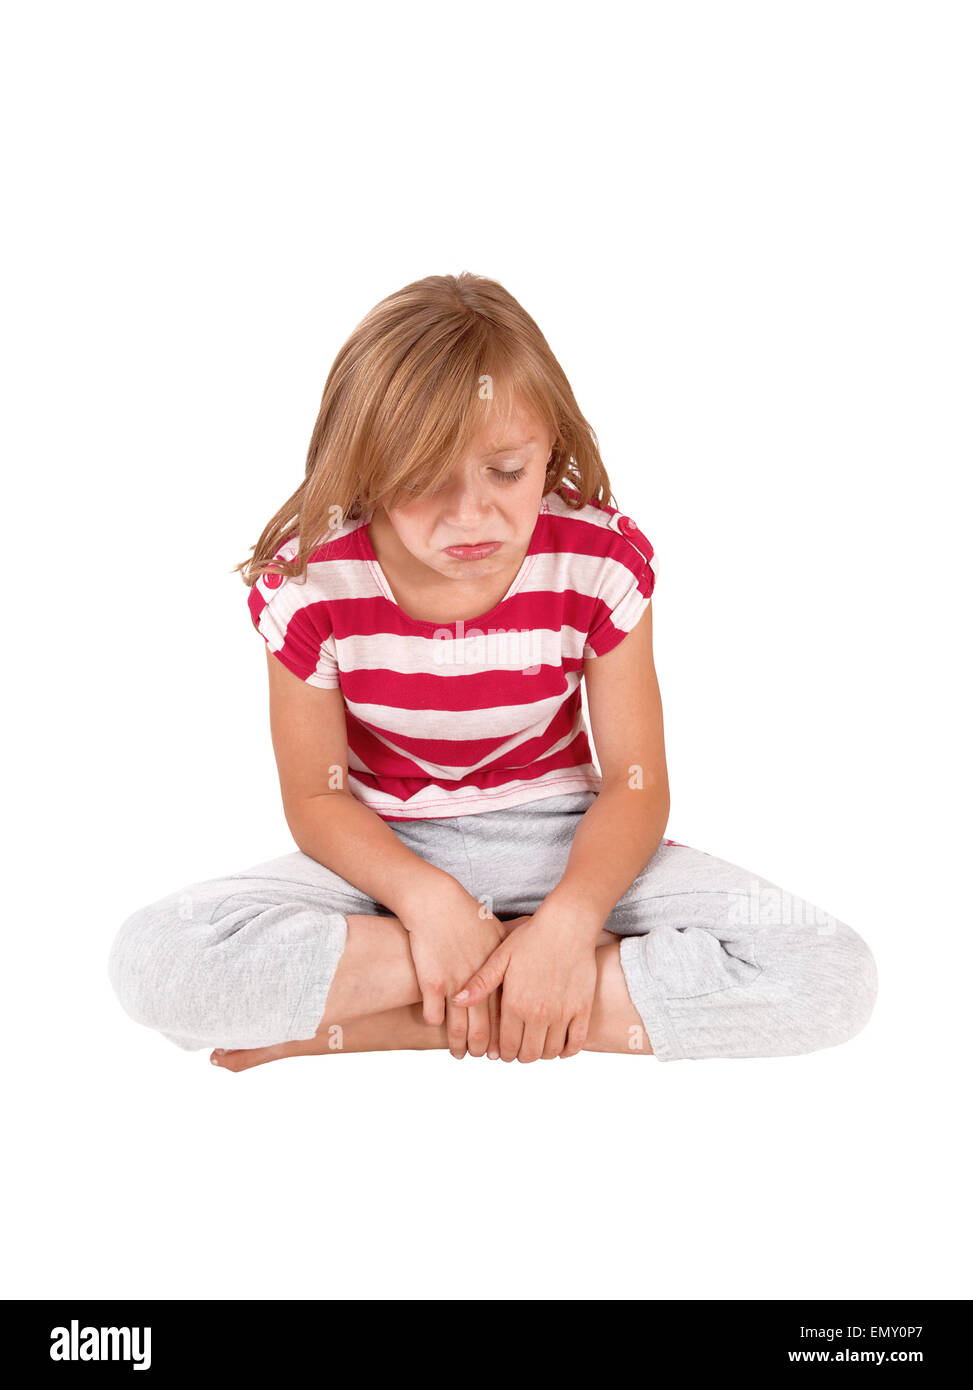 A little very unhappy girl sitting in her track pants and striped top on the floor and crying, isolated on white background. Stock Photo